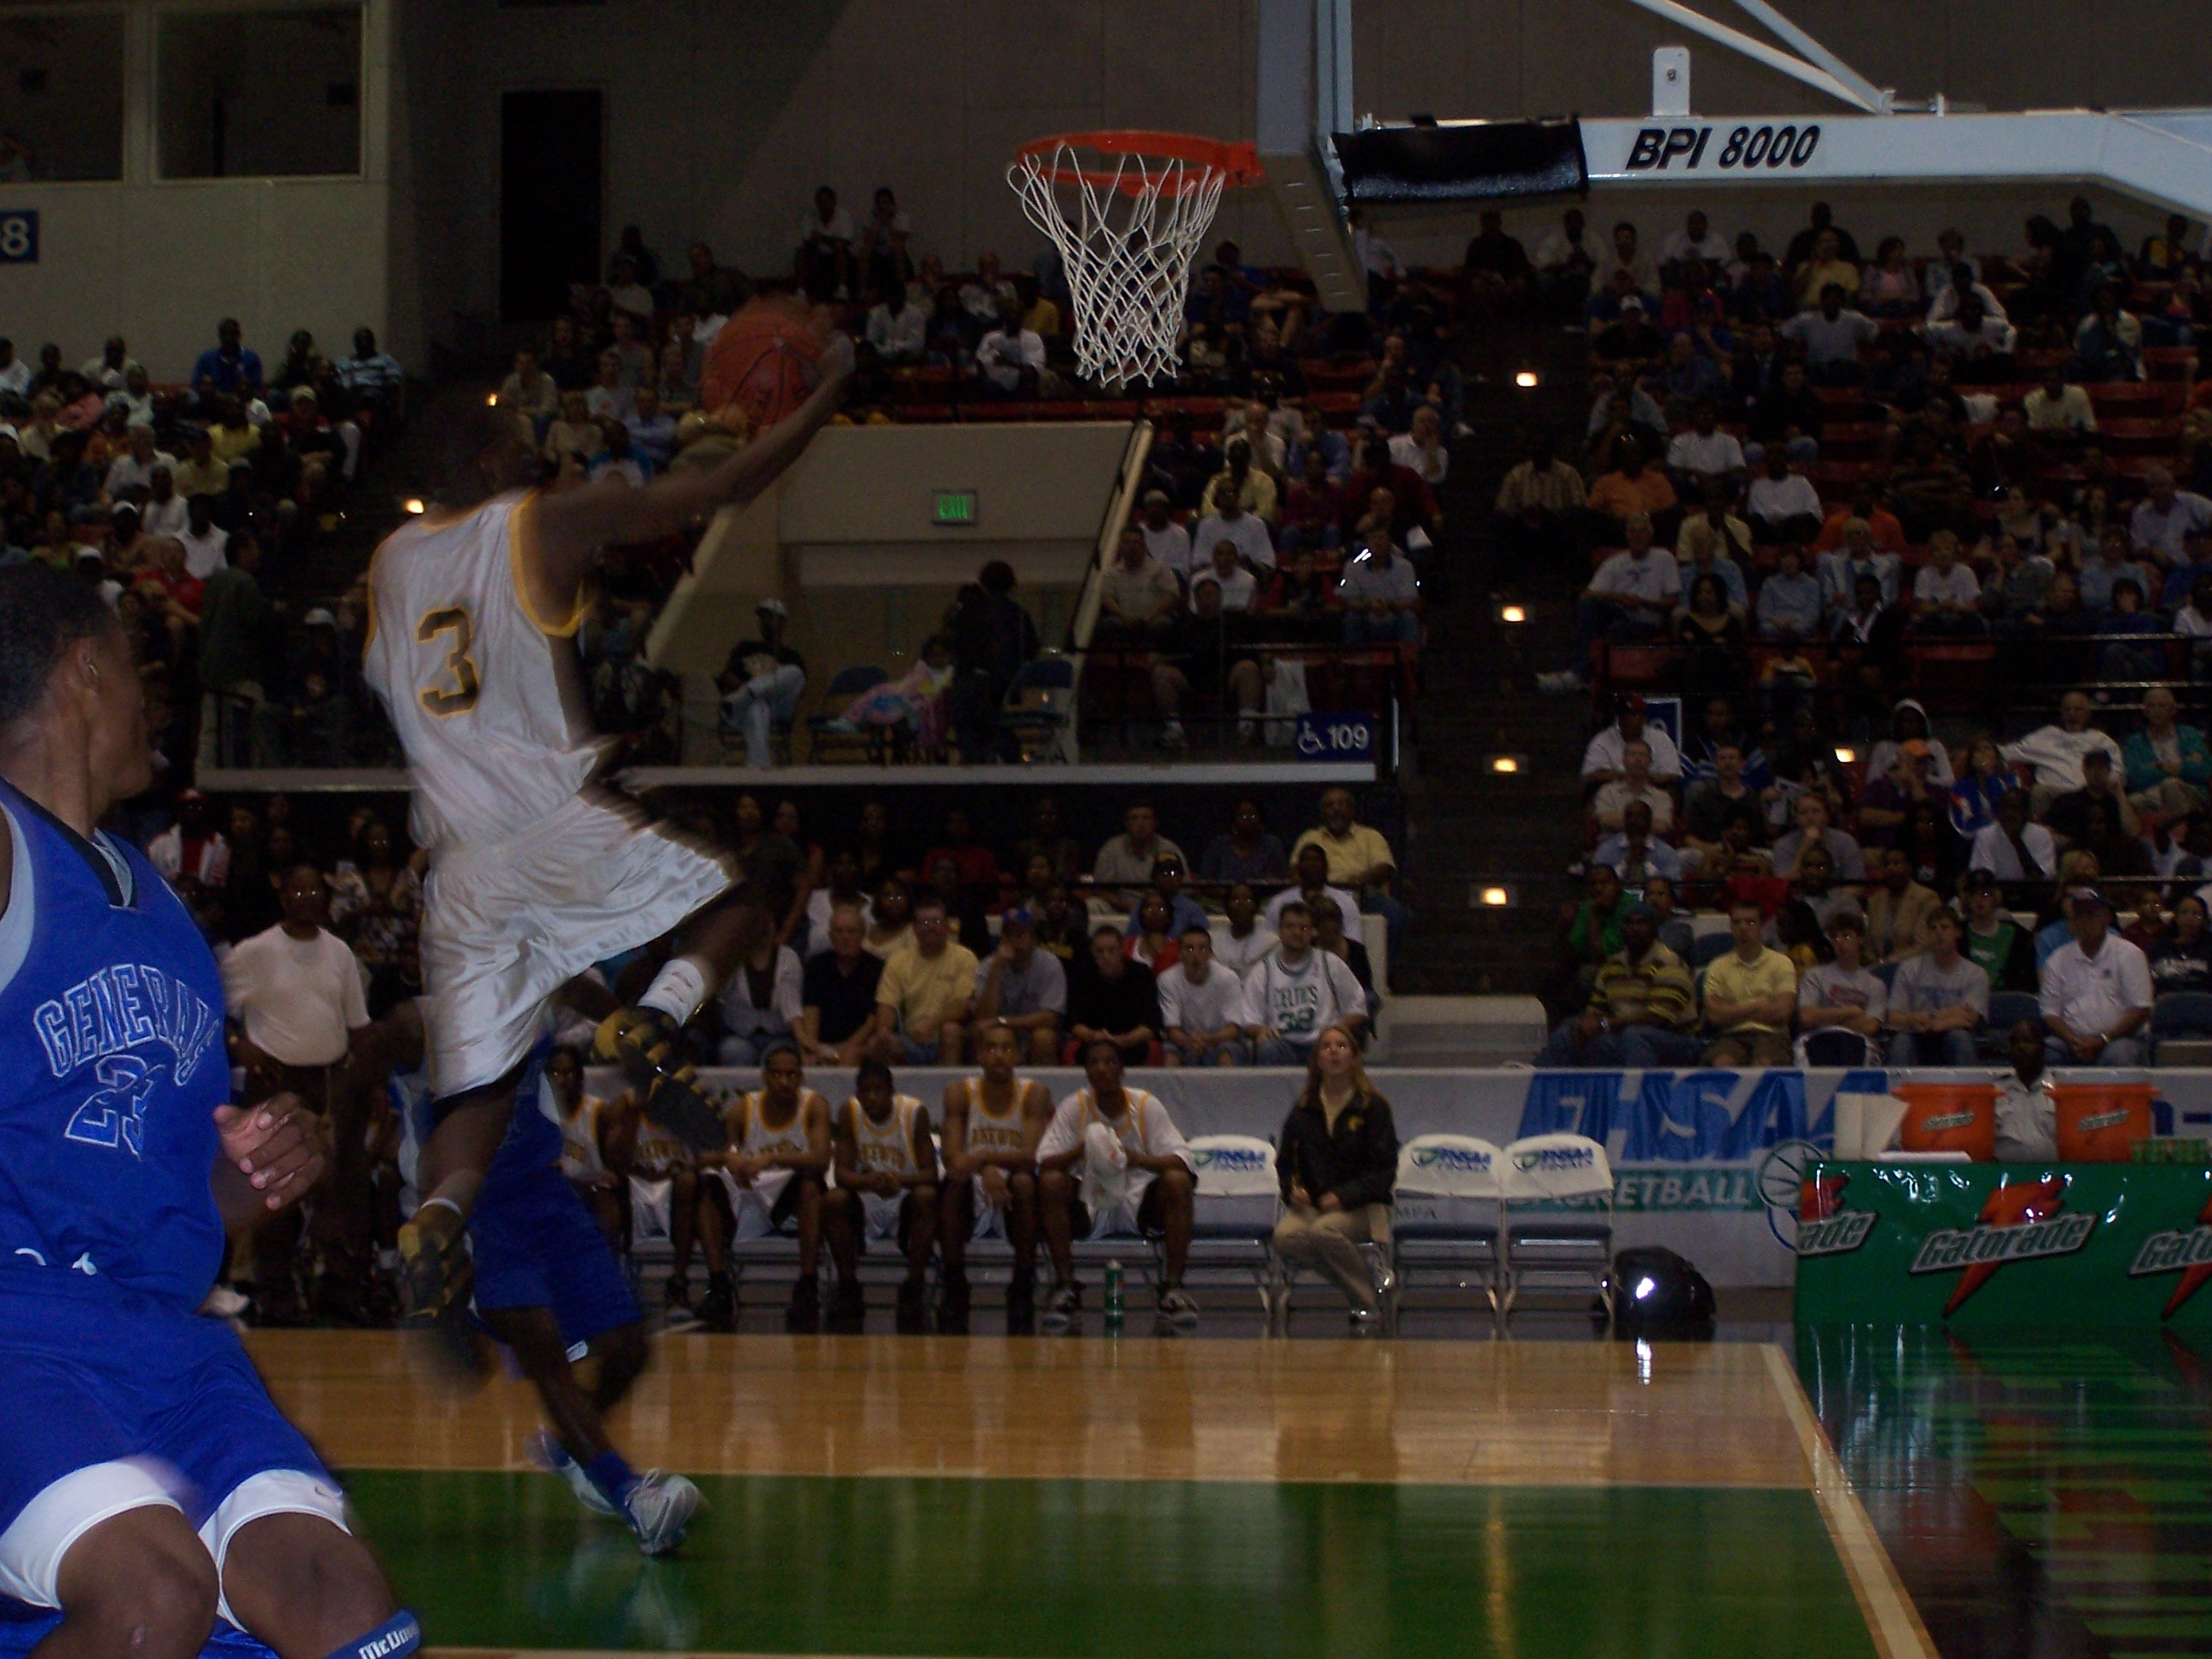 Ed Nixon skies for two of his game high 28 points for Lakewood